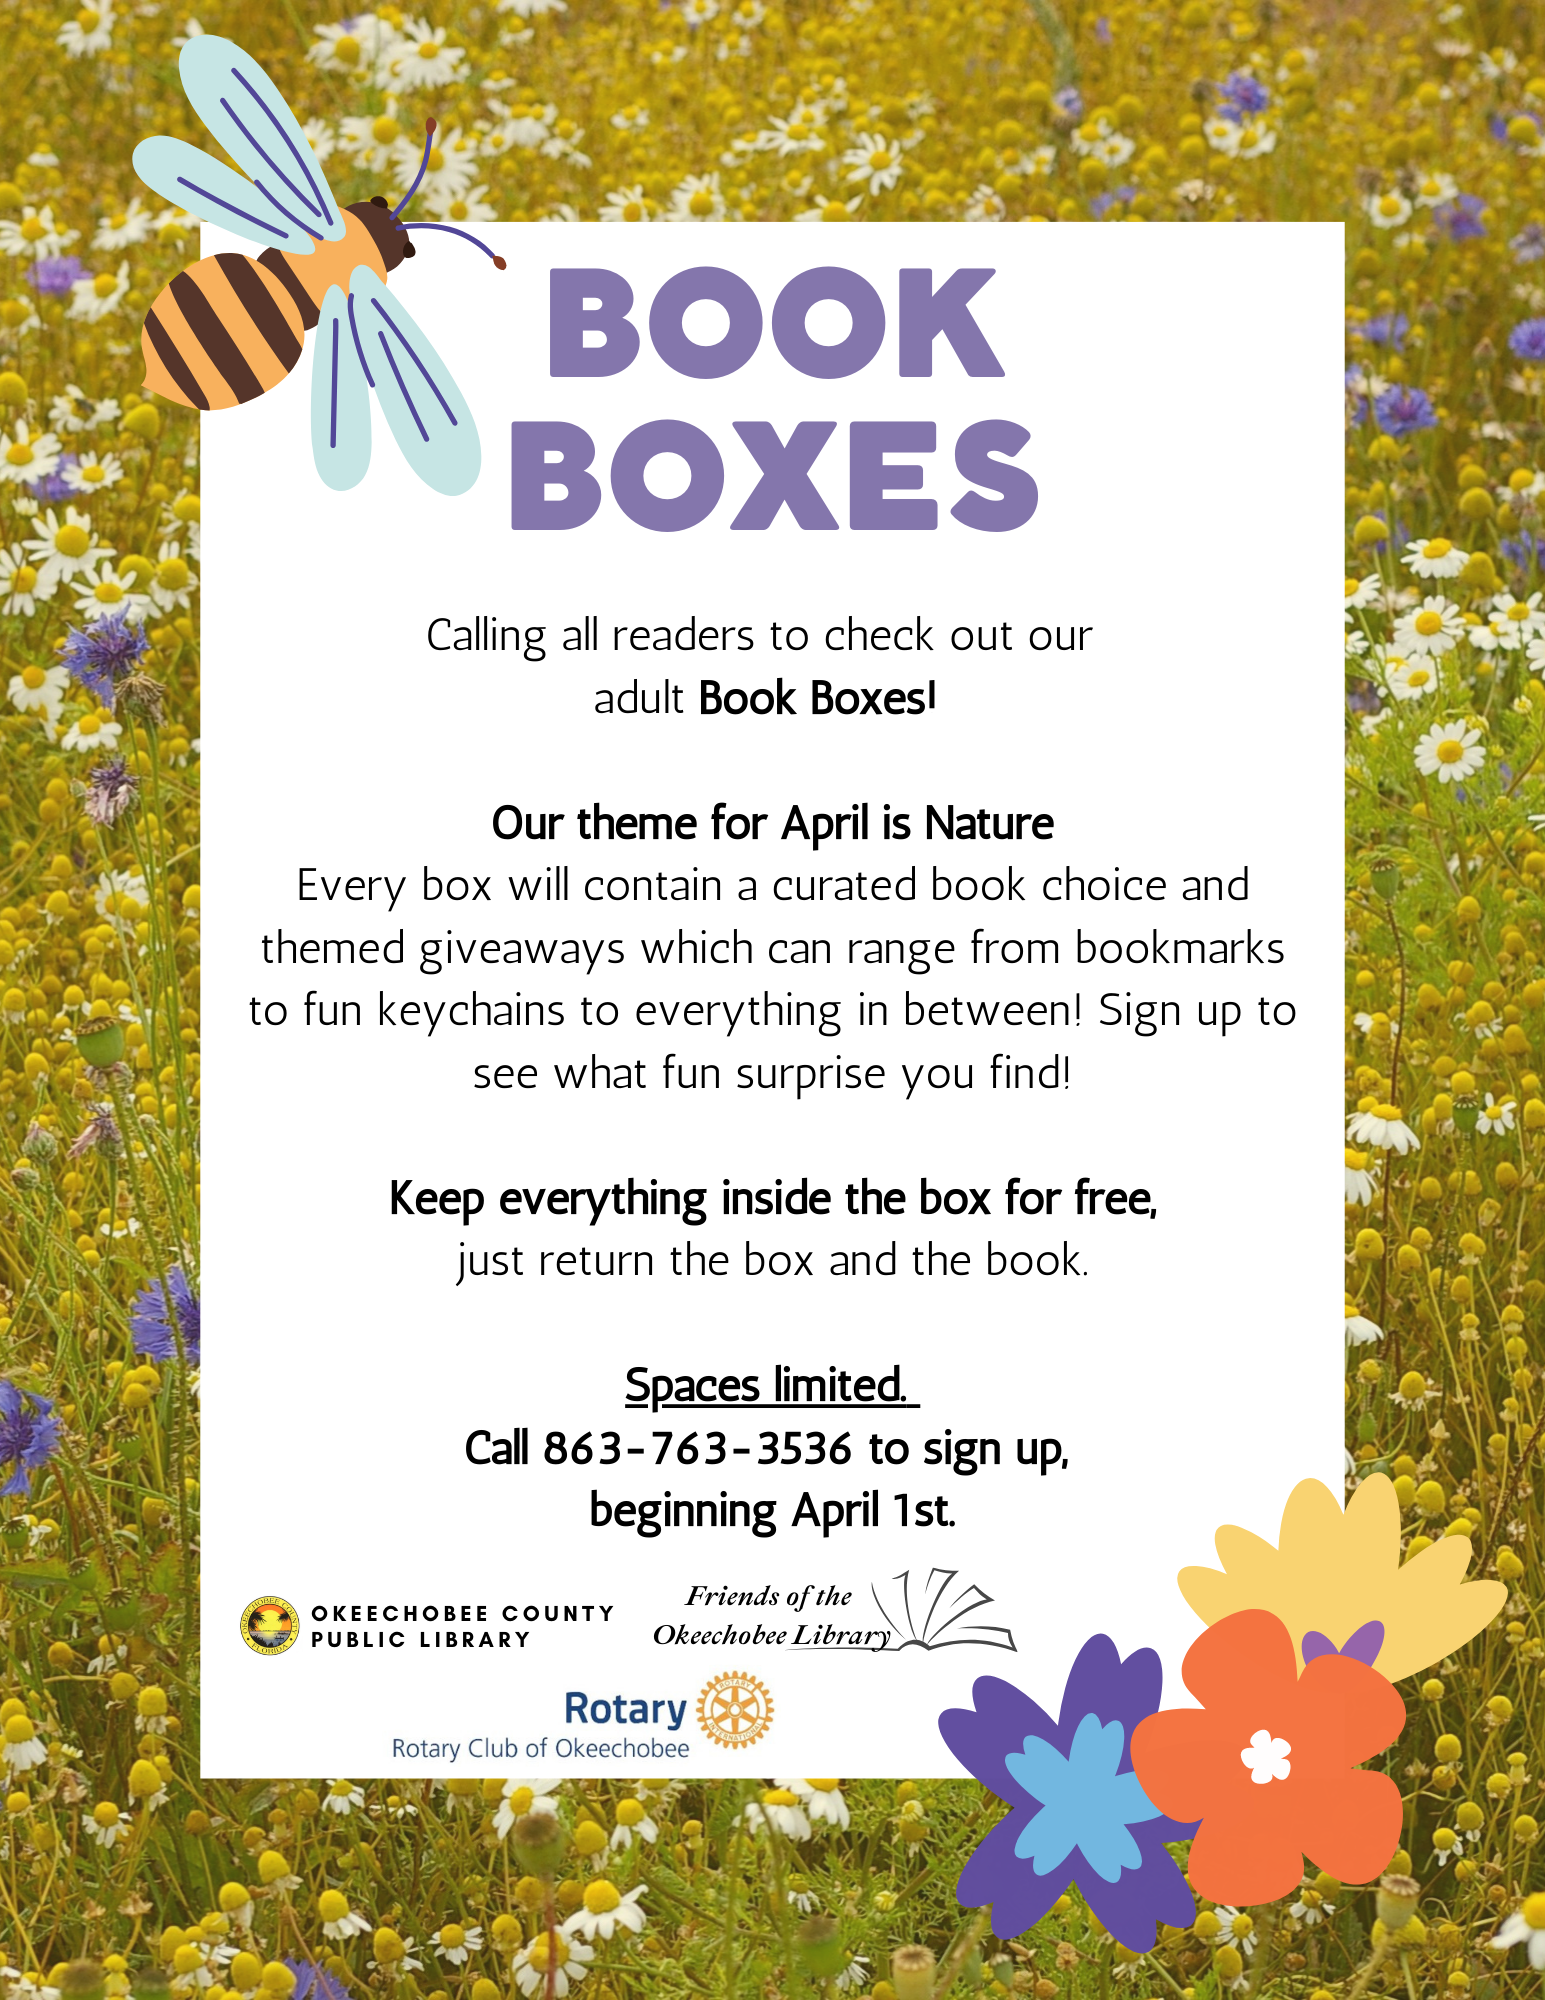 April Book Boxes! Every box will contain a curated book choice and themed giveaways which can range from bookmarks to fun keychains to everything in between! Sign up to see what fun surprise you find